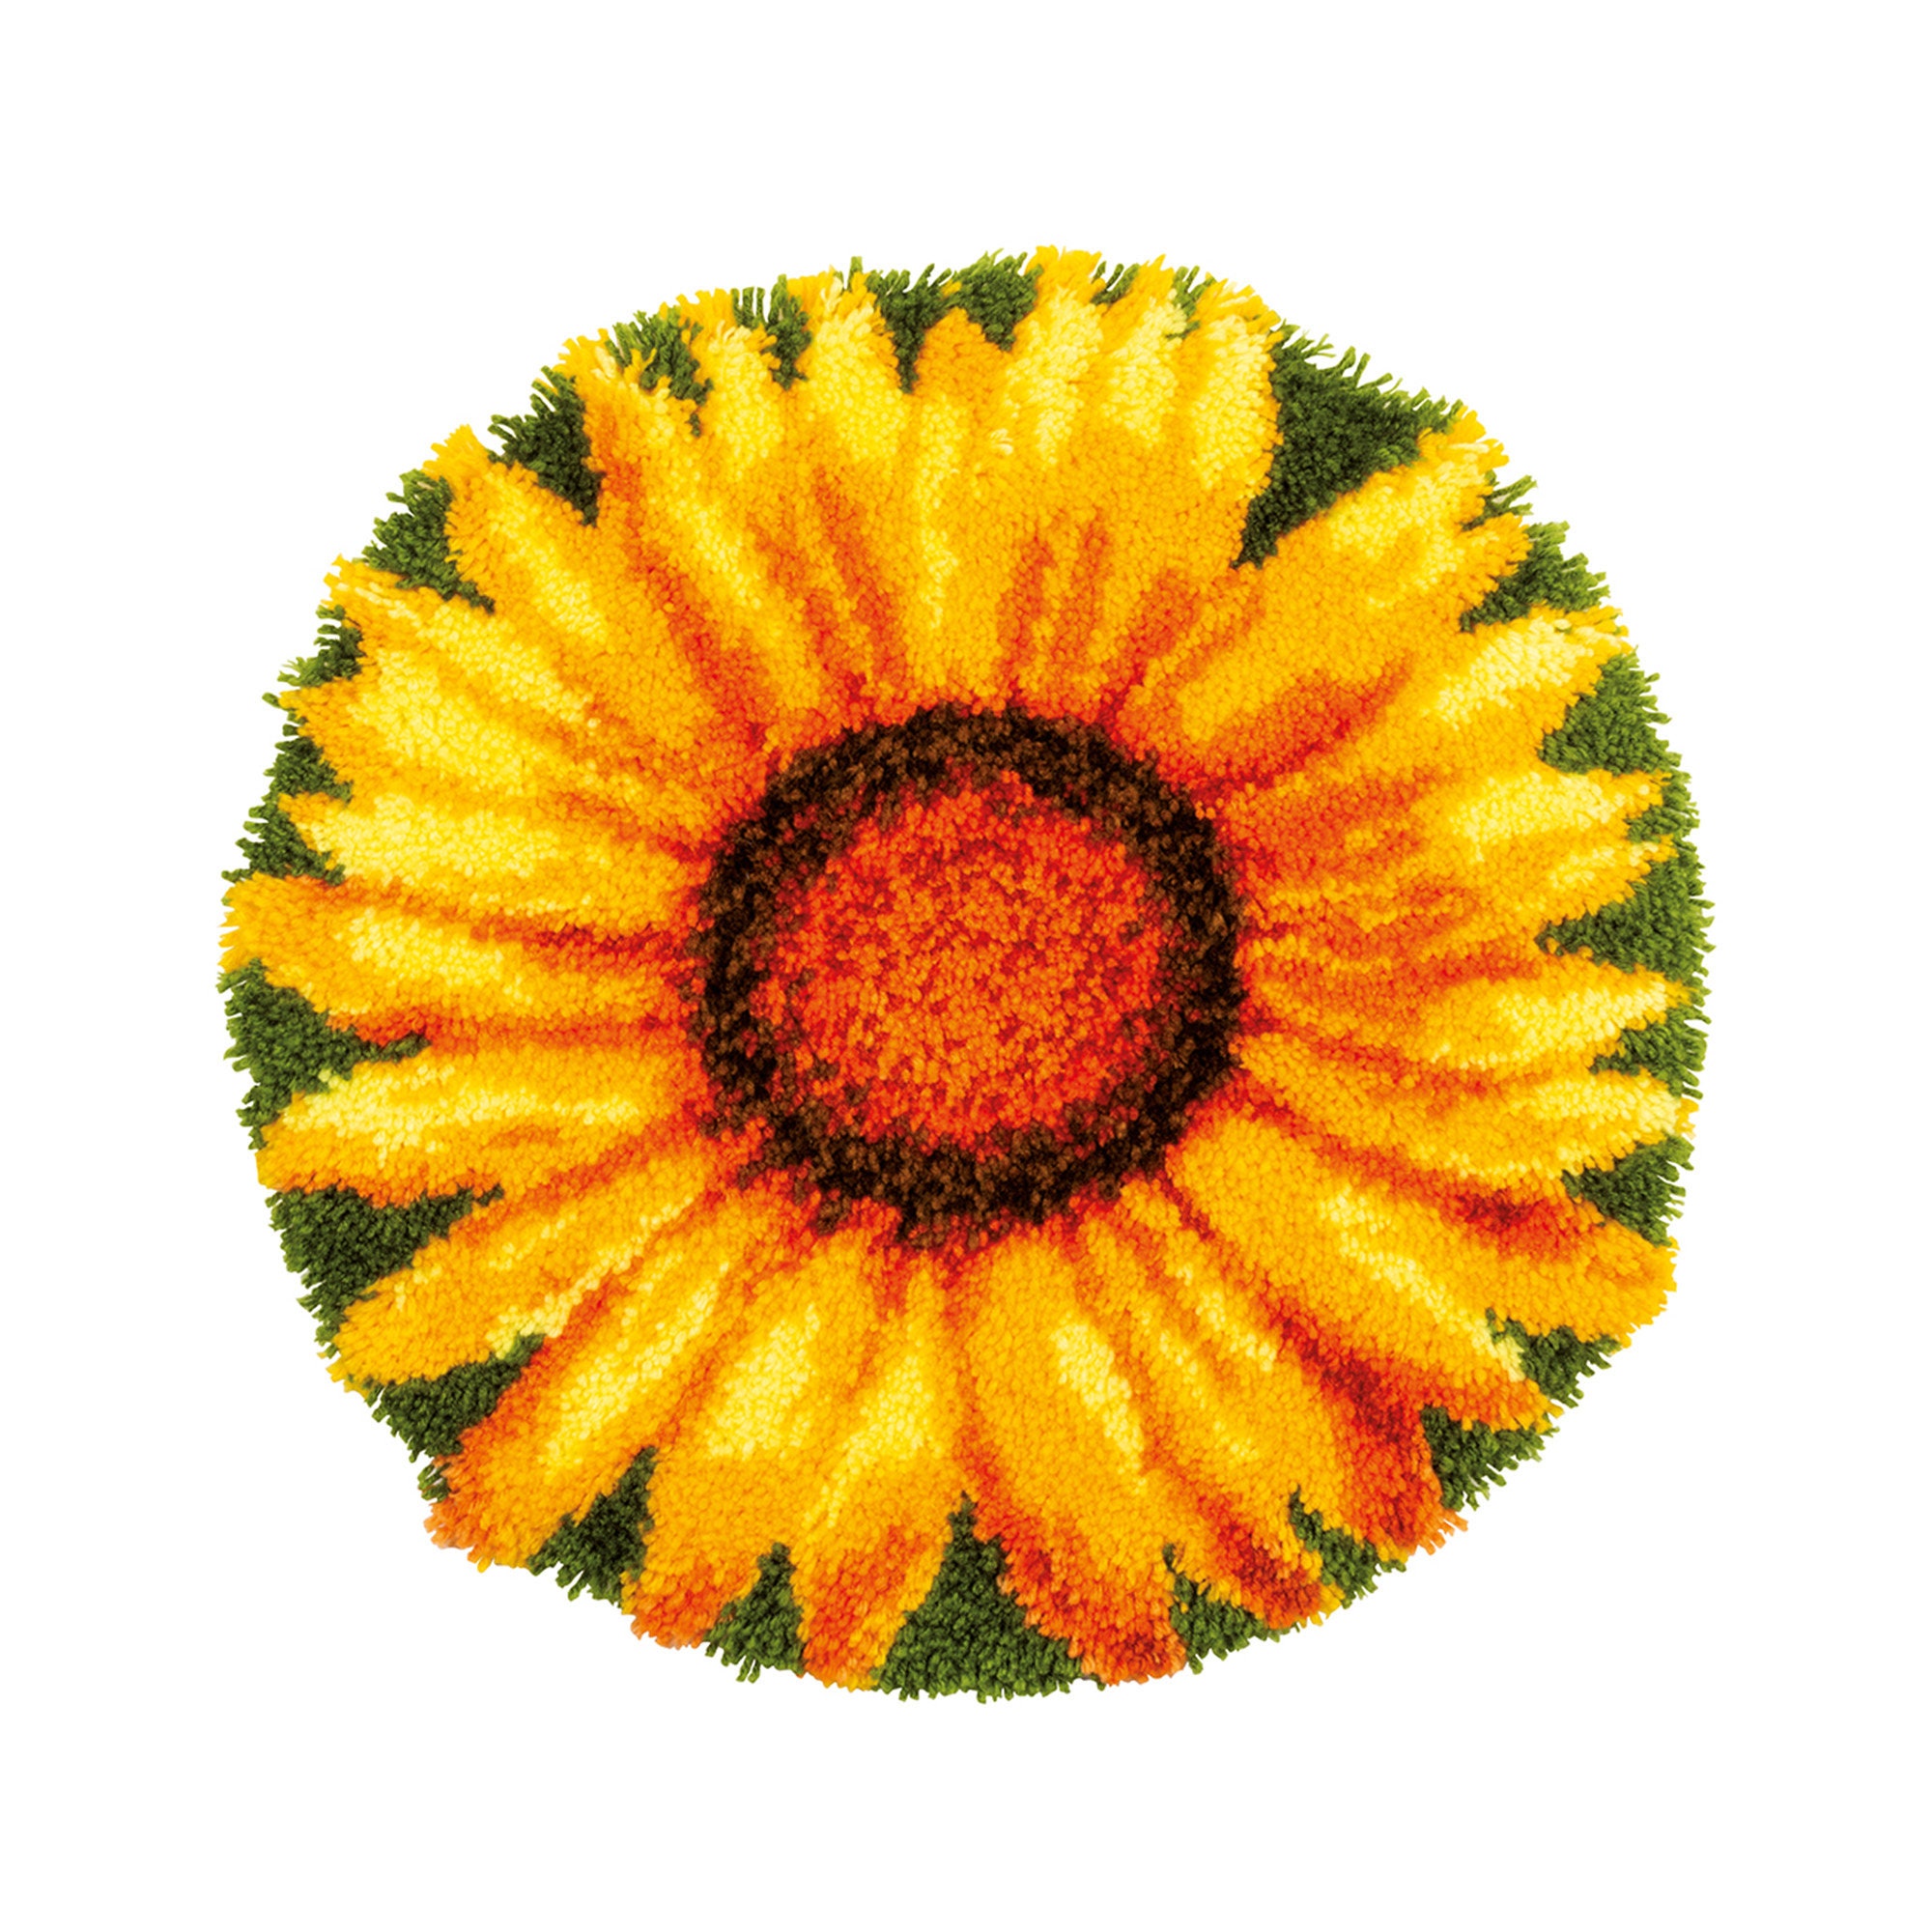 DOYLKE Latch Hook Rug Kit, Sunflower Pattern Printed Canvas DIY Rug Latch Hook Kits for Adults Beginners, Embroidery Decoration 20.5